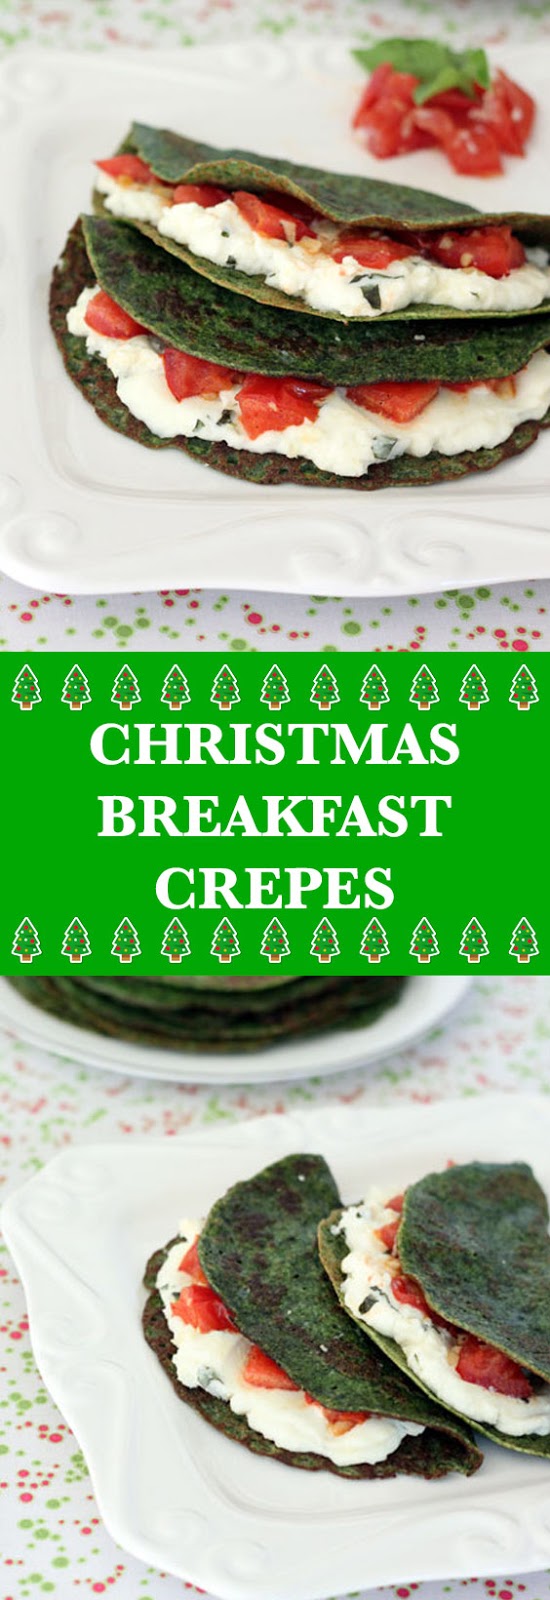 Chritsmas Savory Spinach Crepes with Ricotta